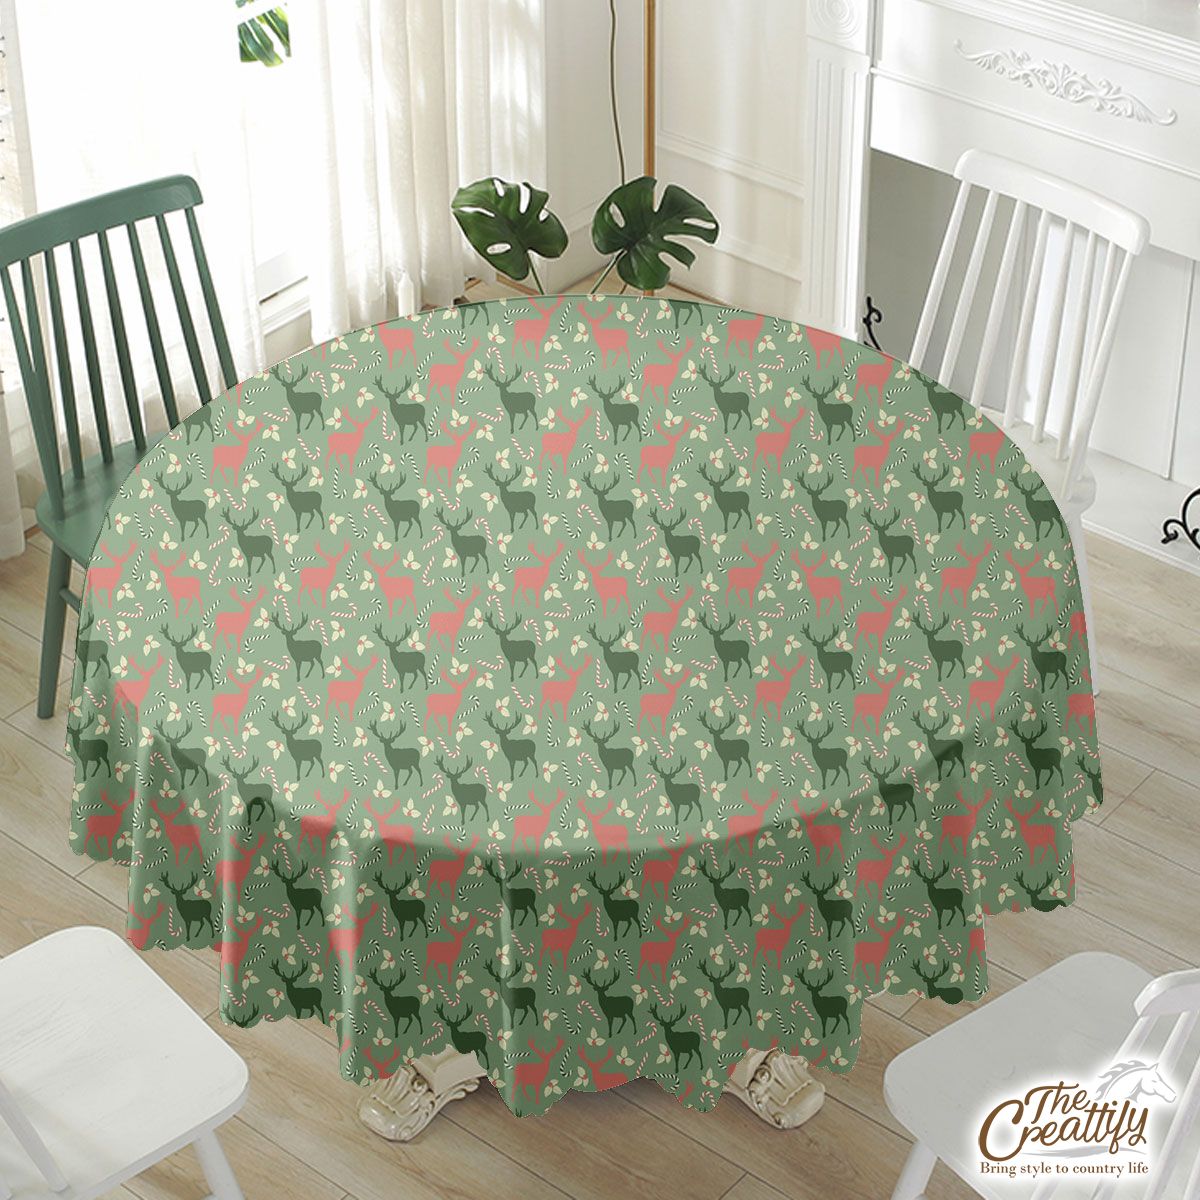 Reindeer, Christmas Flowers And Candy Canes Waterproof Tablecloth